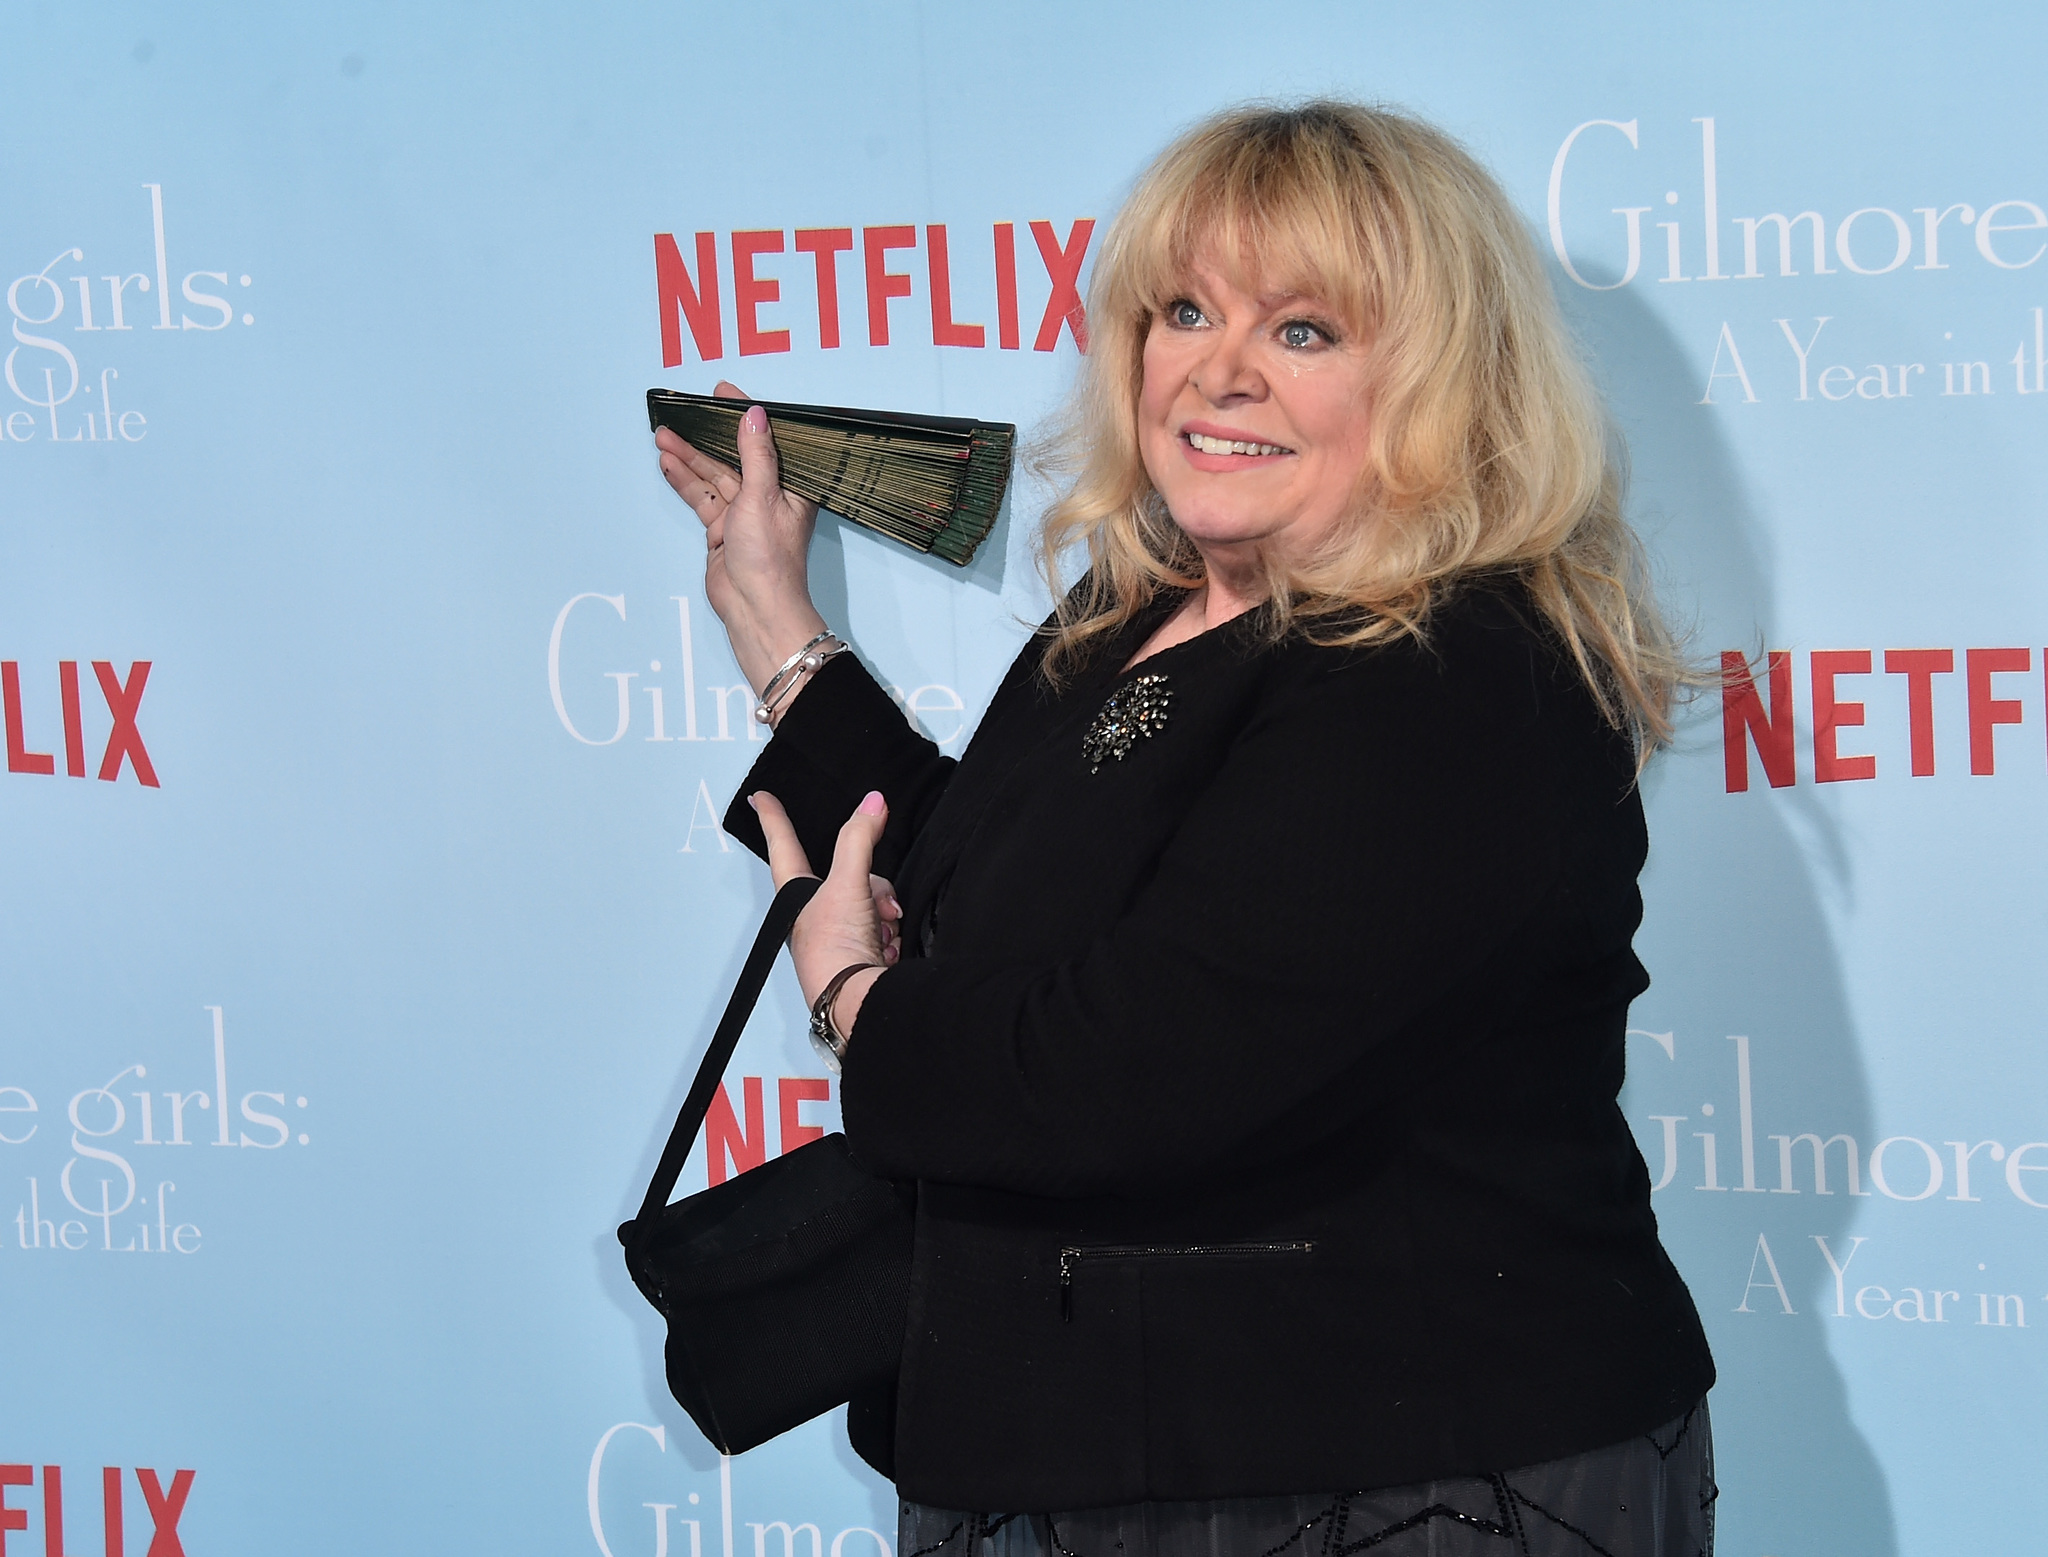 is sally struthers still alive